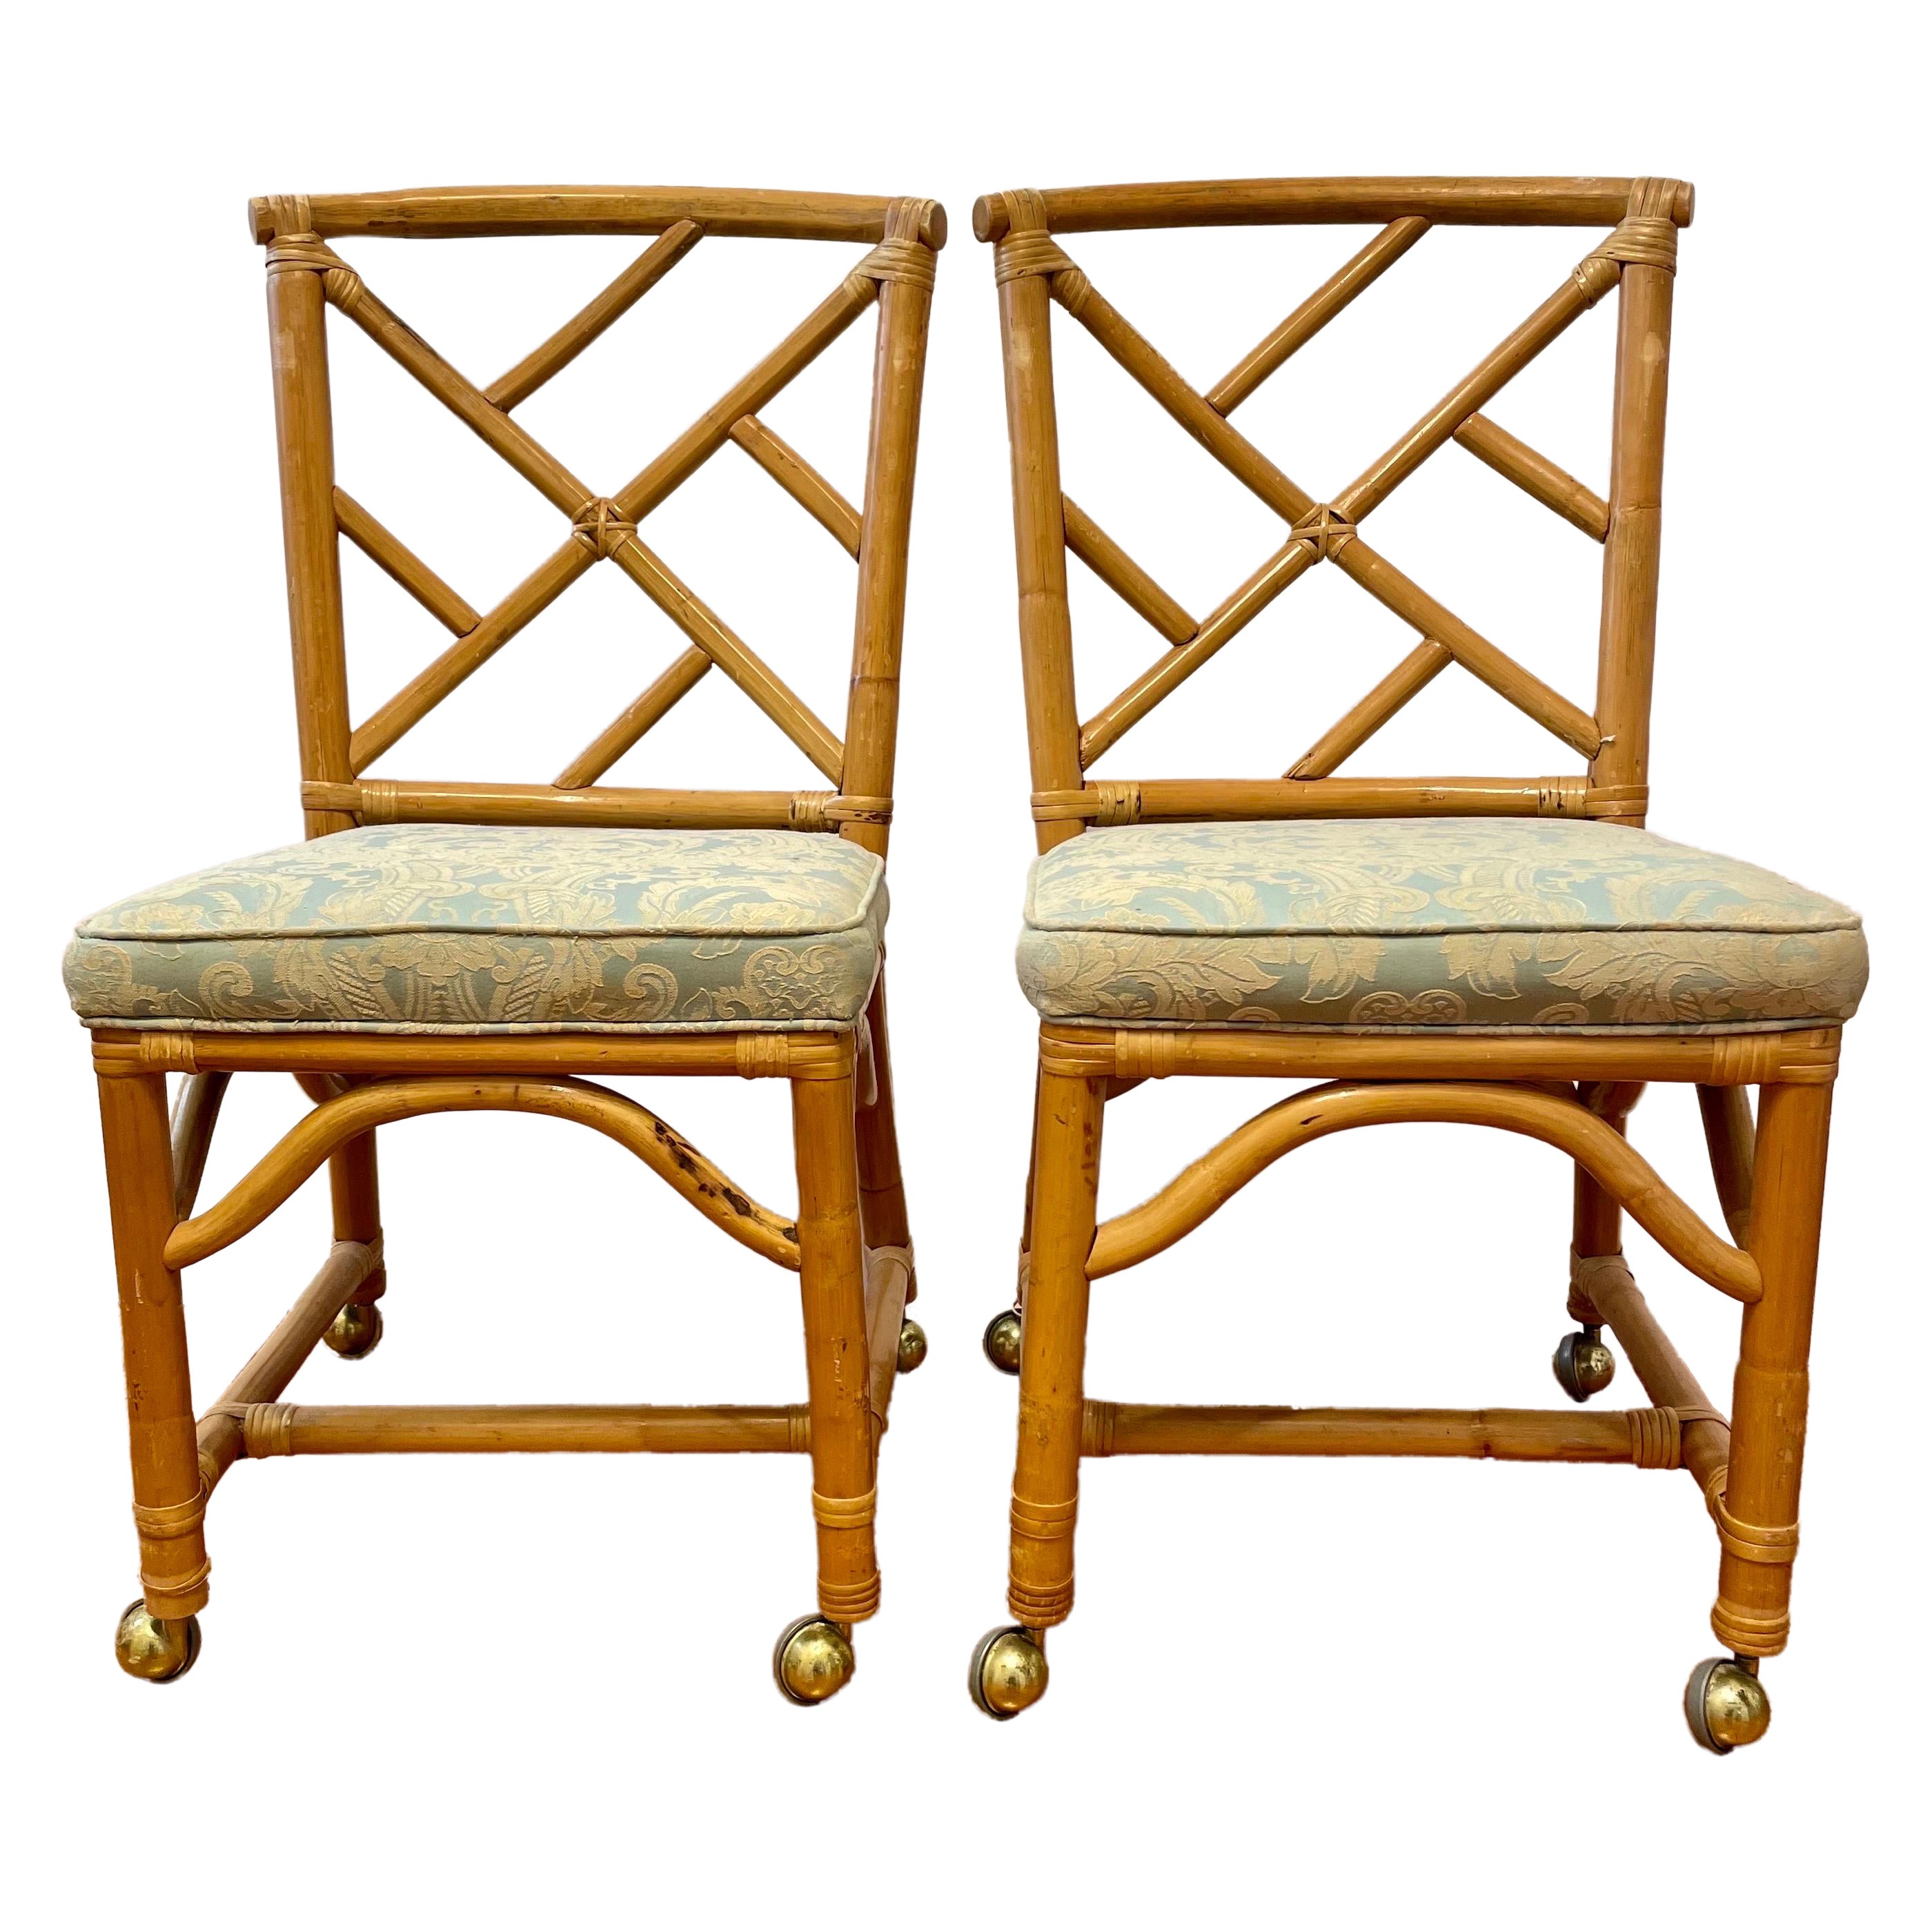 Pair of Bamboo Rattan Chairs on Casters